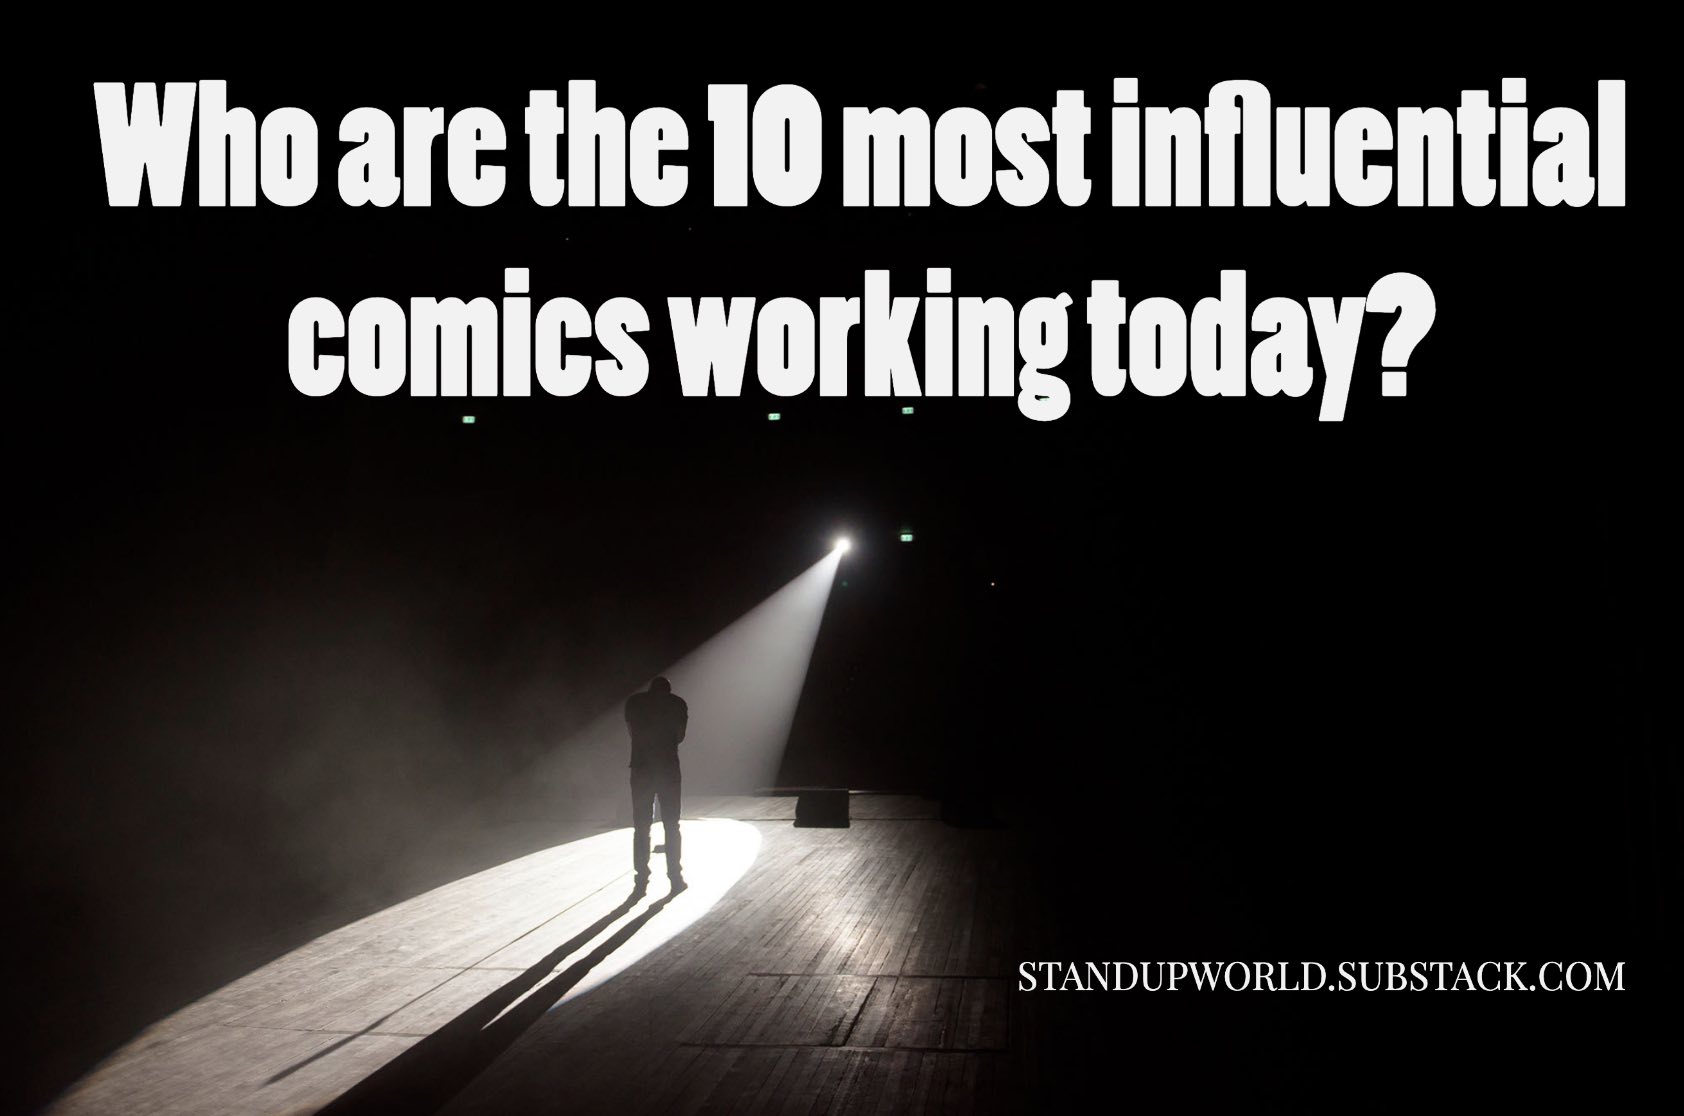 Featured image for “WHO ARE THE 10 MOST INFLUENTIAL STAND-UPS WORKING TODAY?”